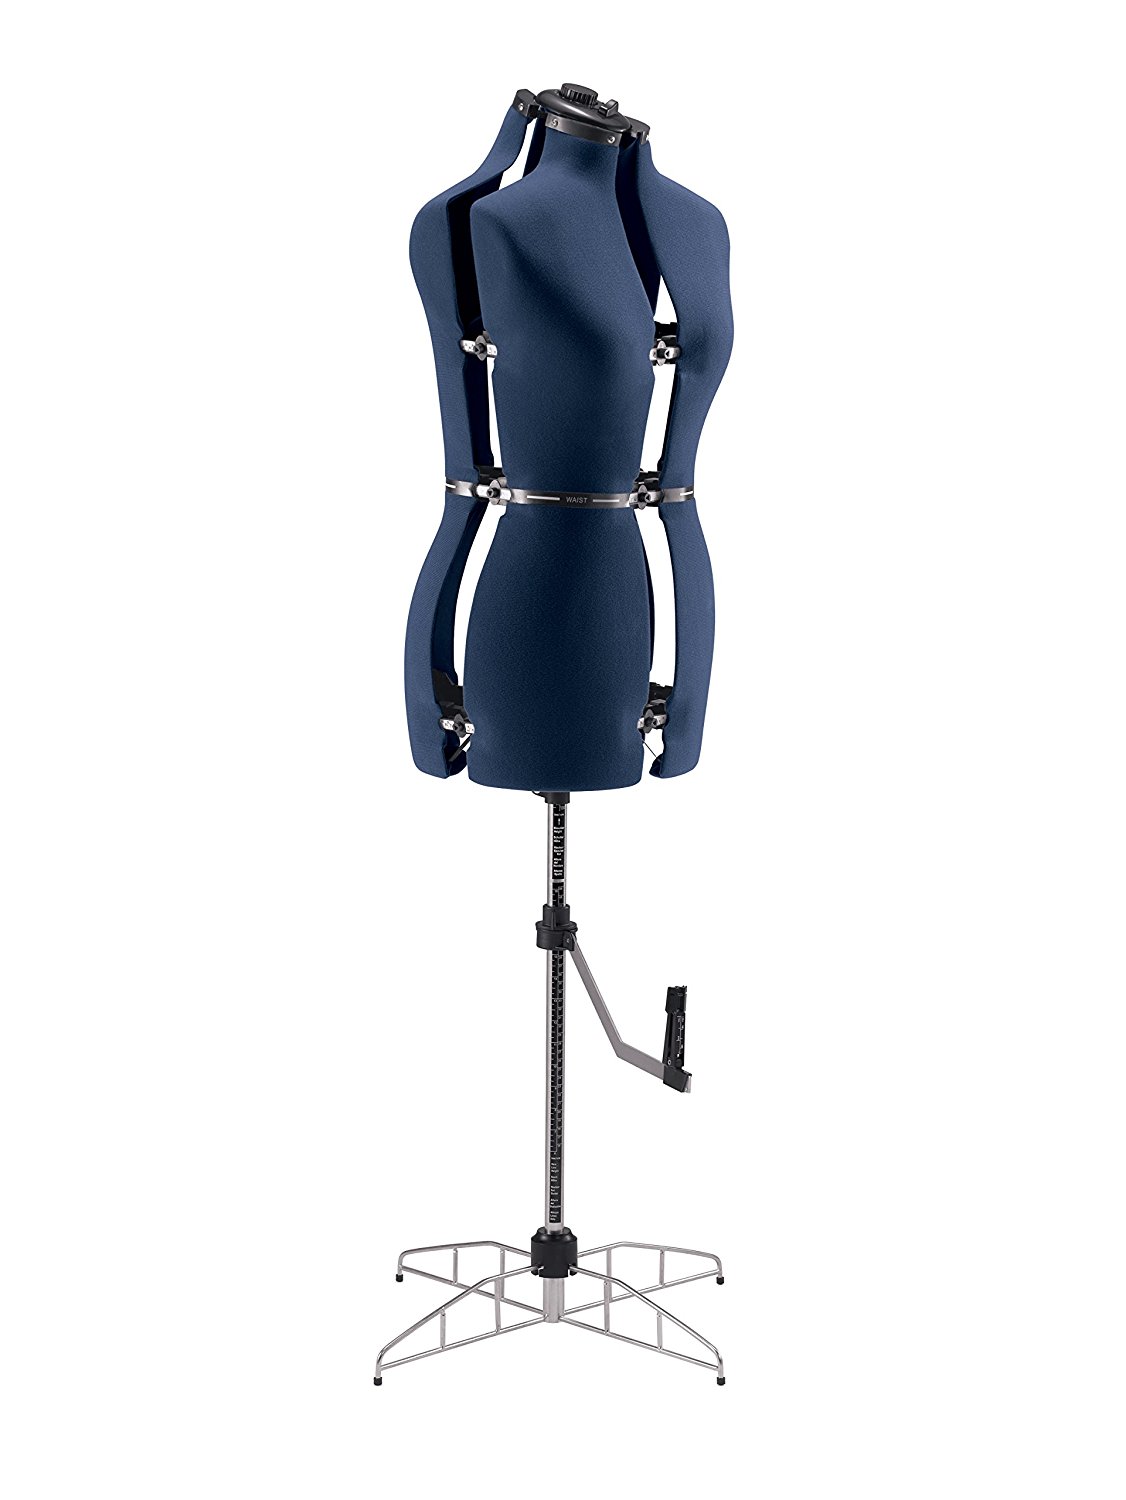 best dress form: Looking for an adjustable dress form? Make your choice with it!